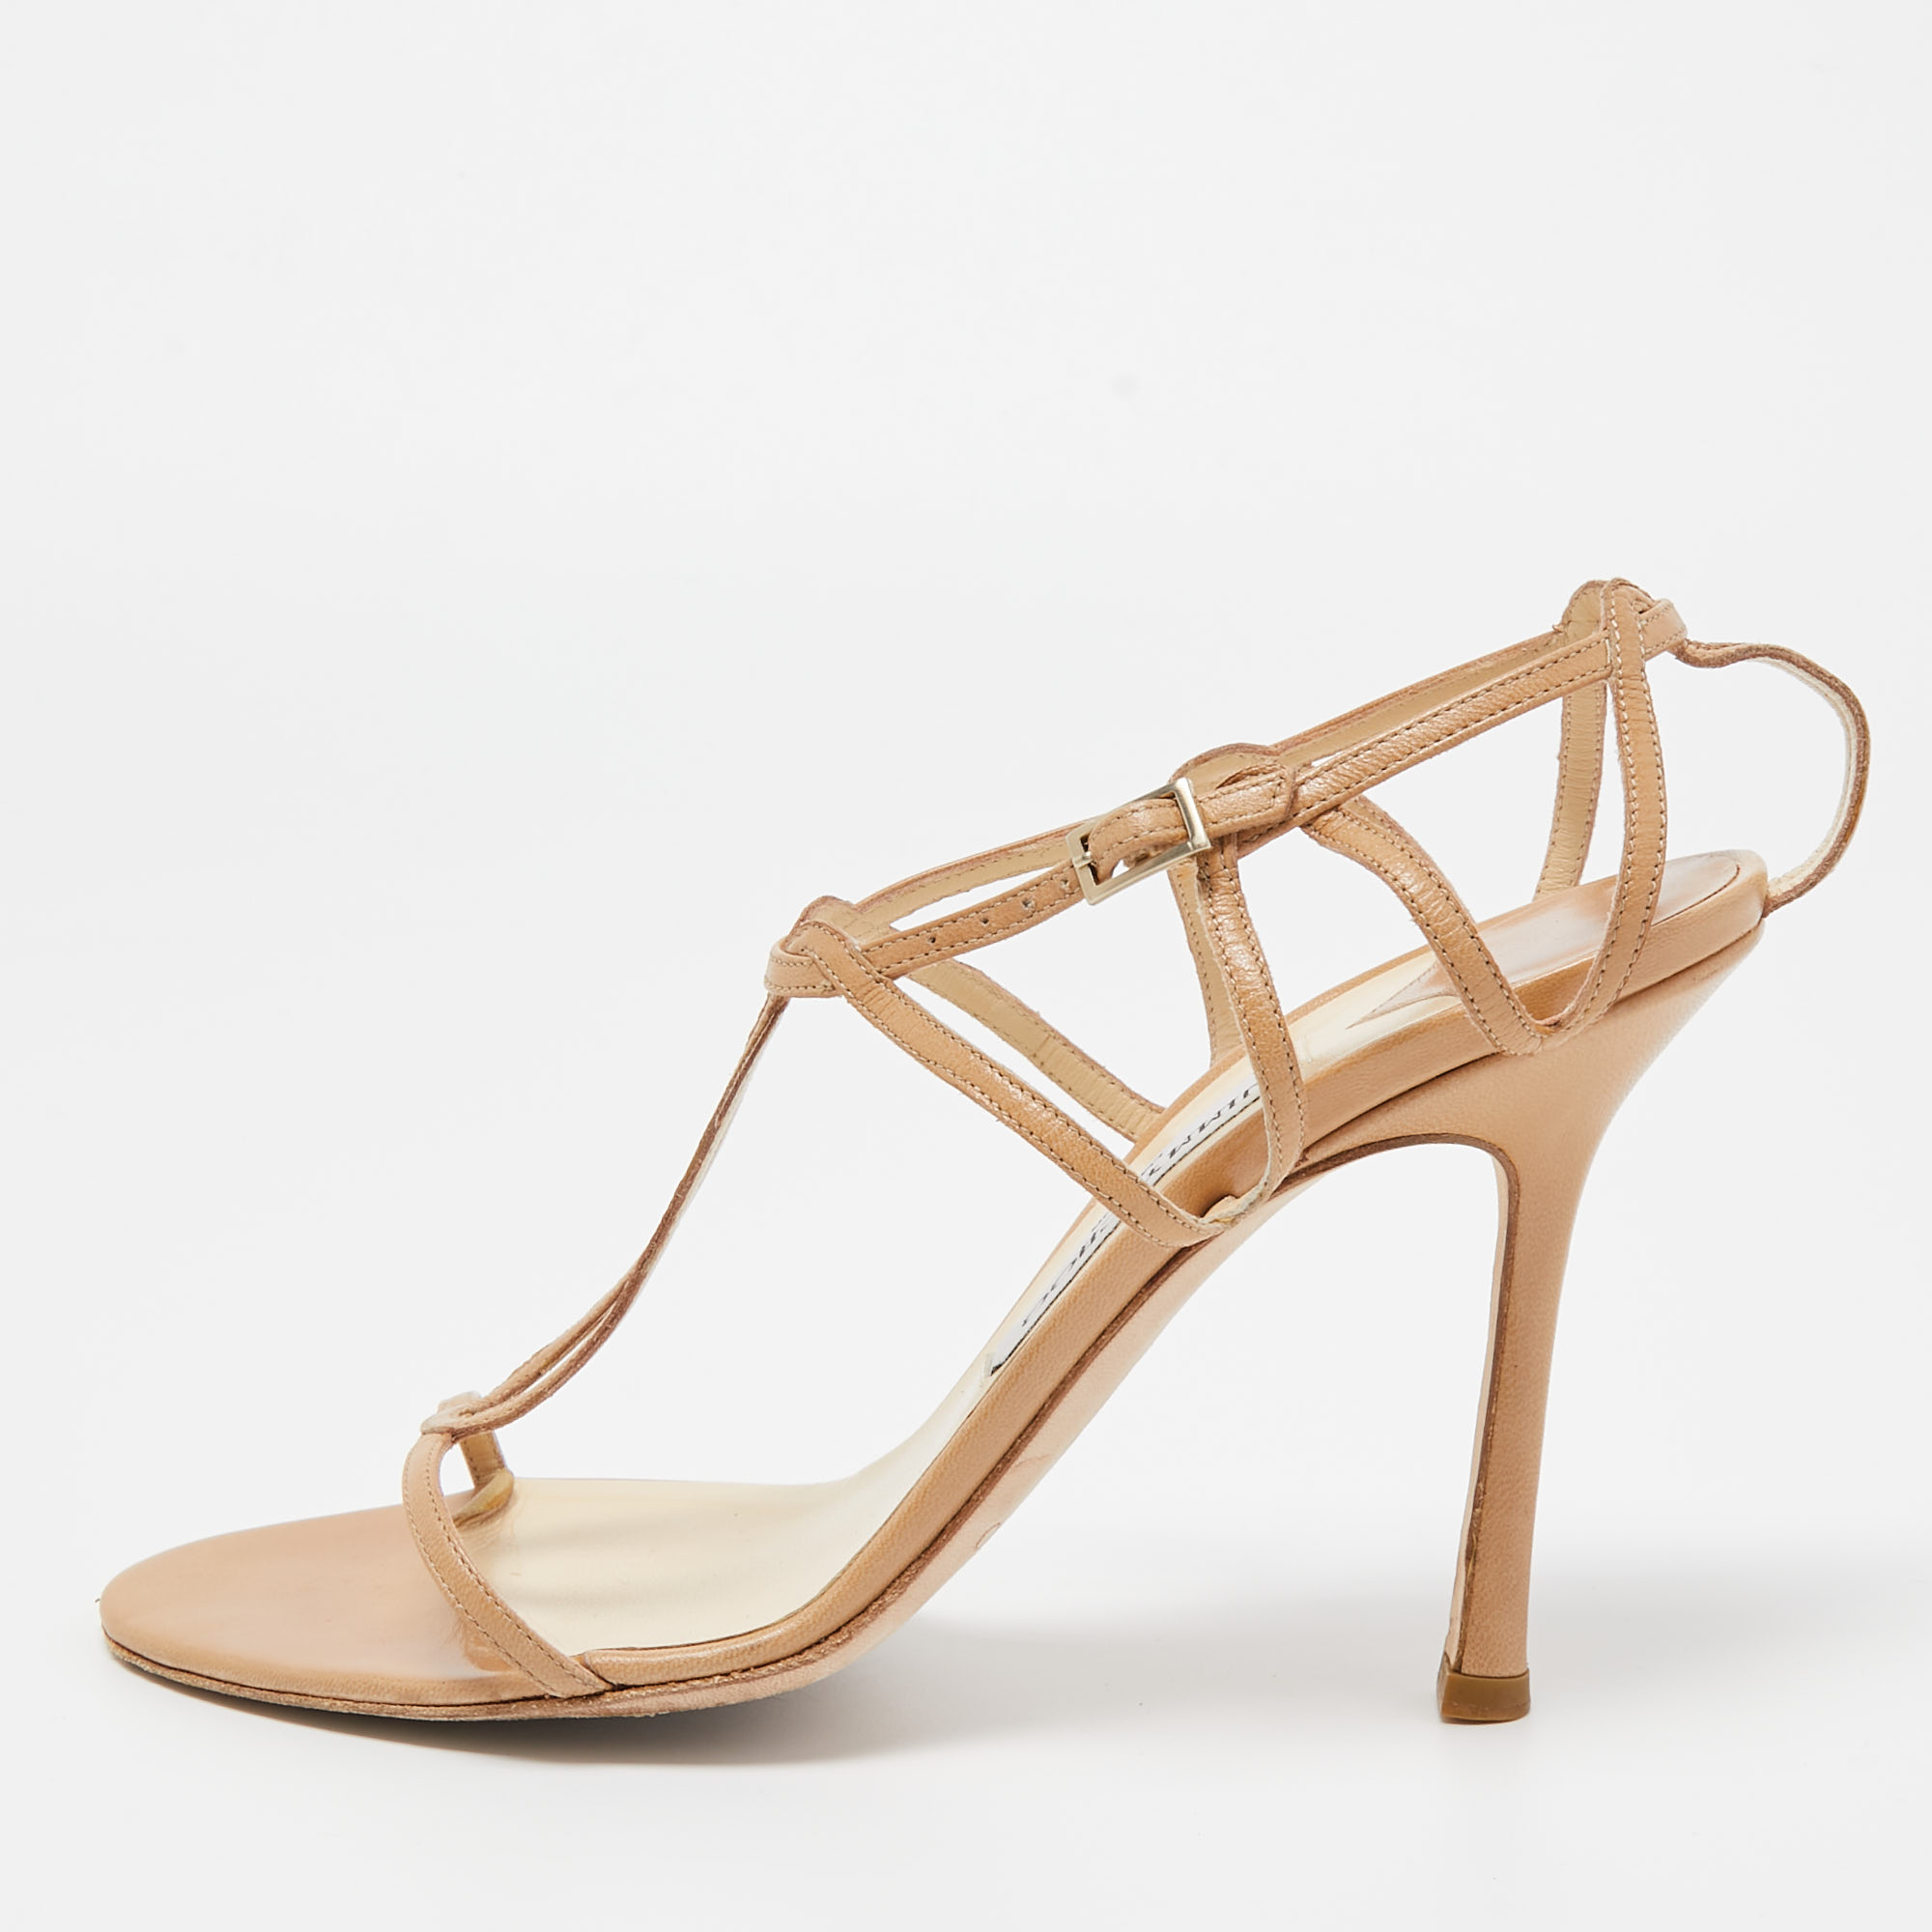 Jimmy Choo Brown Leather Strappy Sandals Size 39